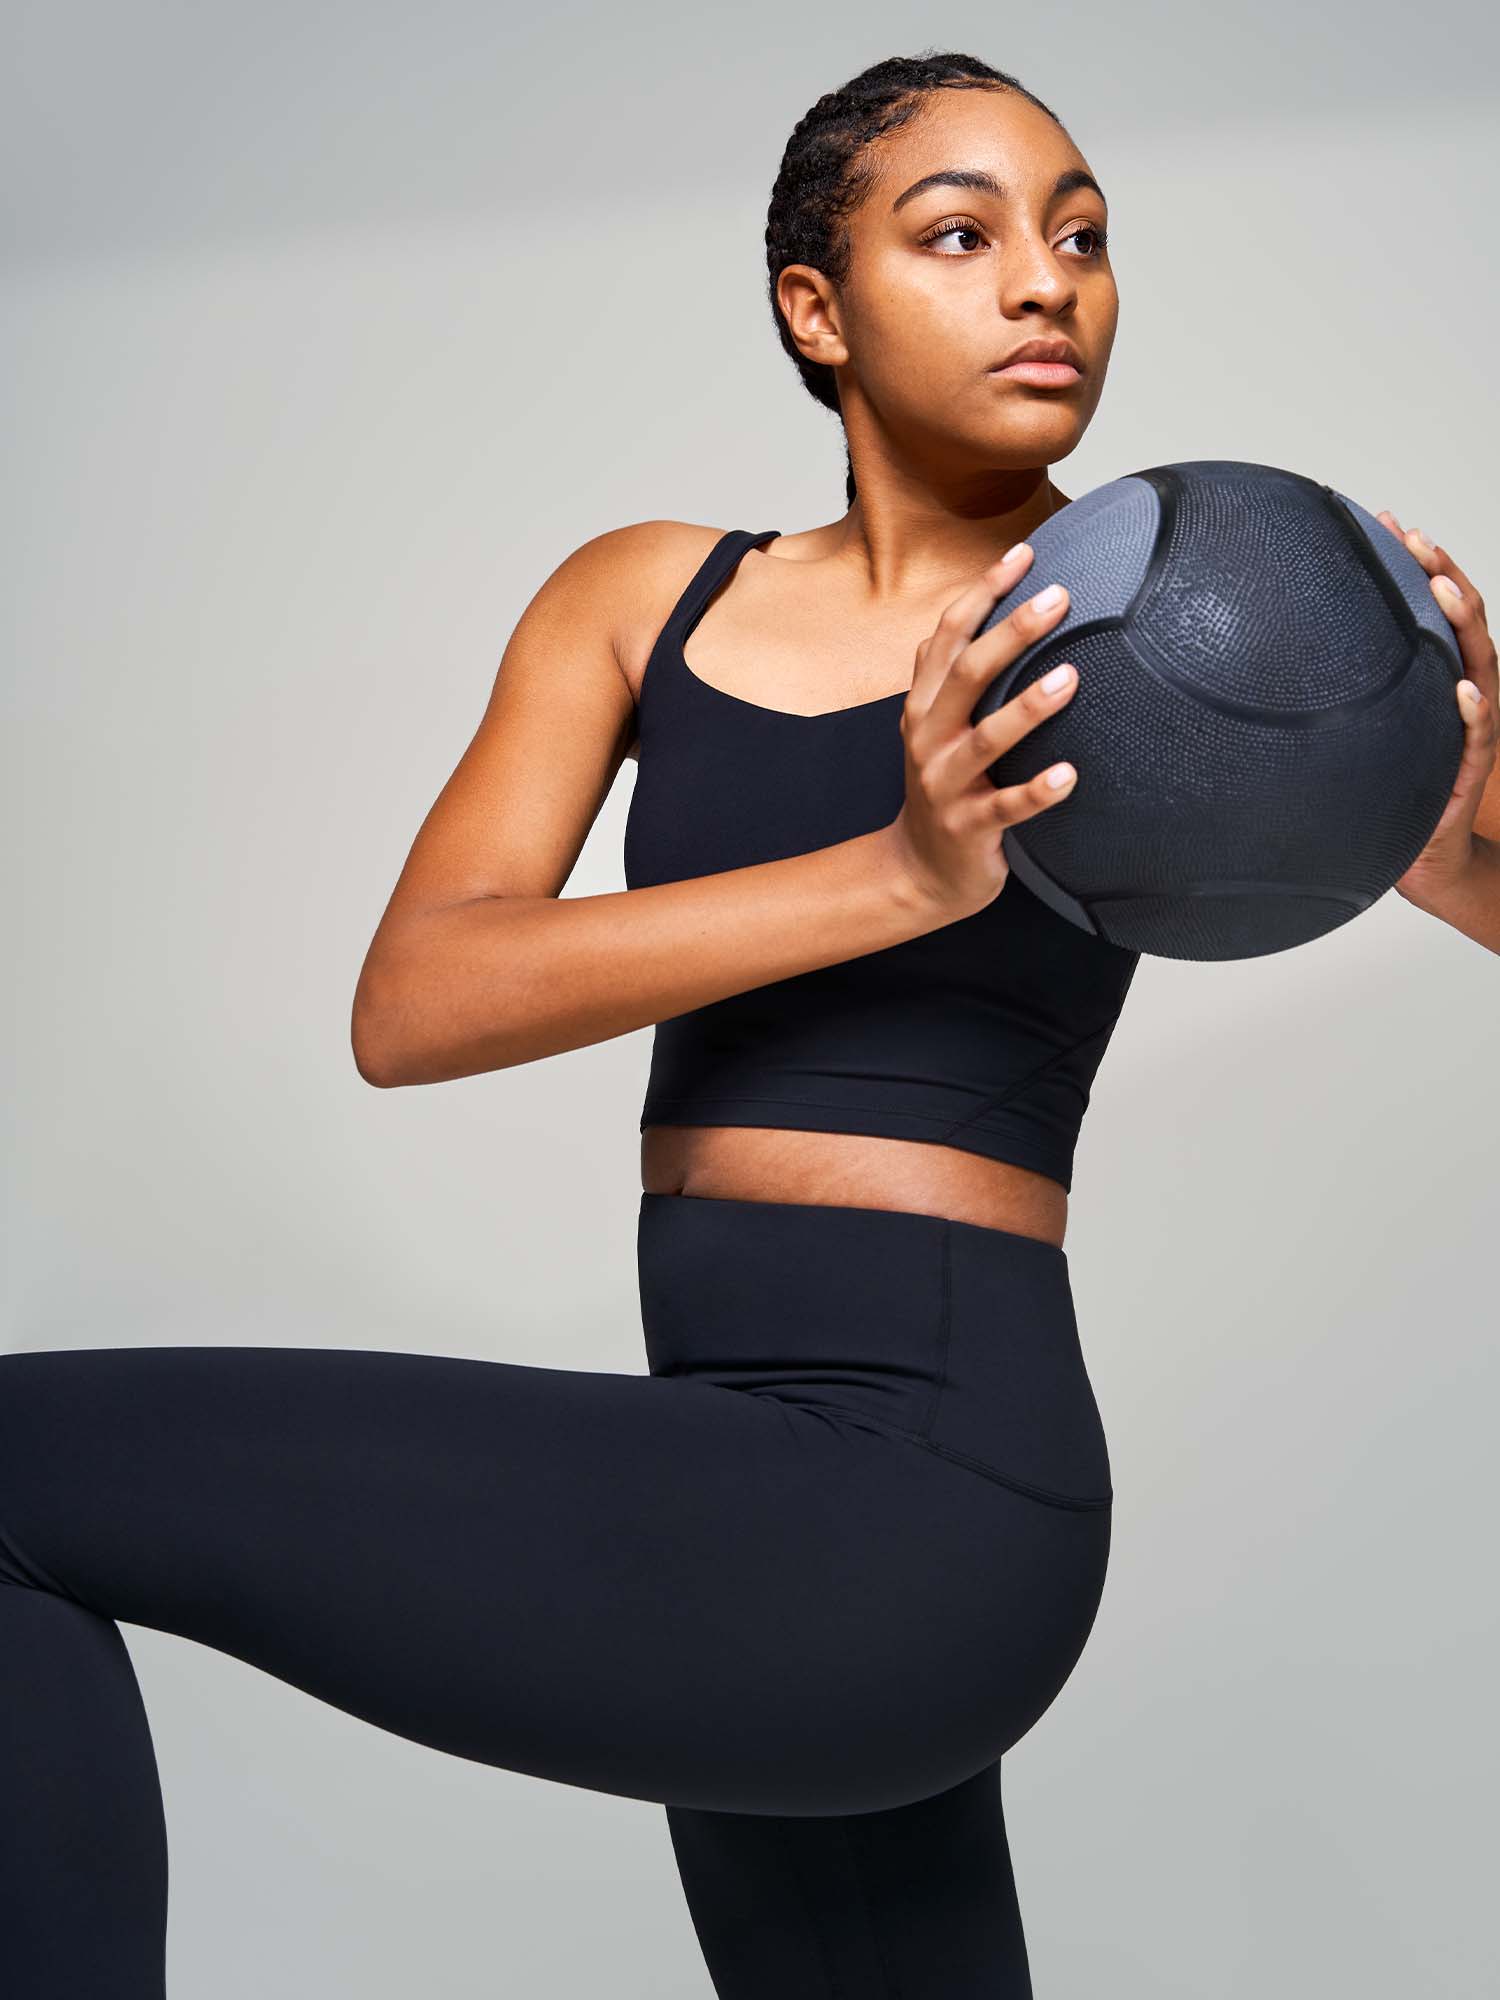 Tall woman wearing a black tank top and leggings holding a medicine ball and twisting